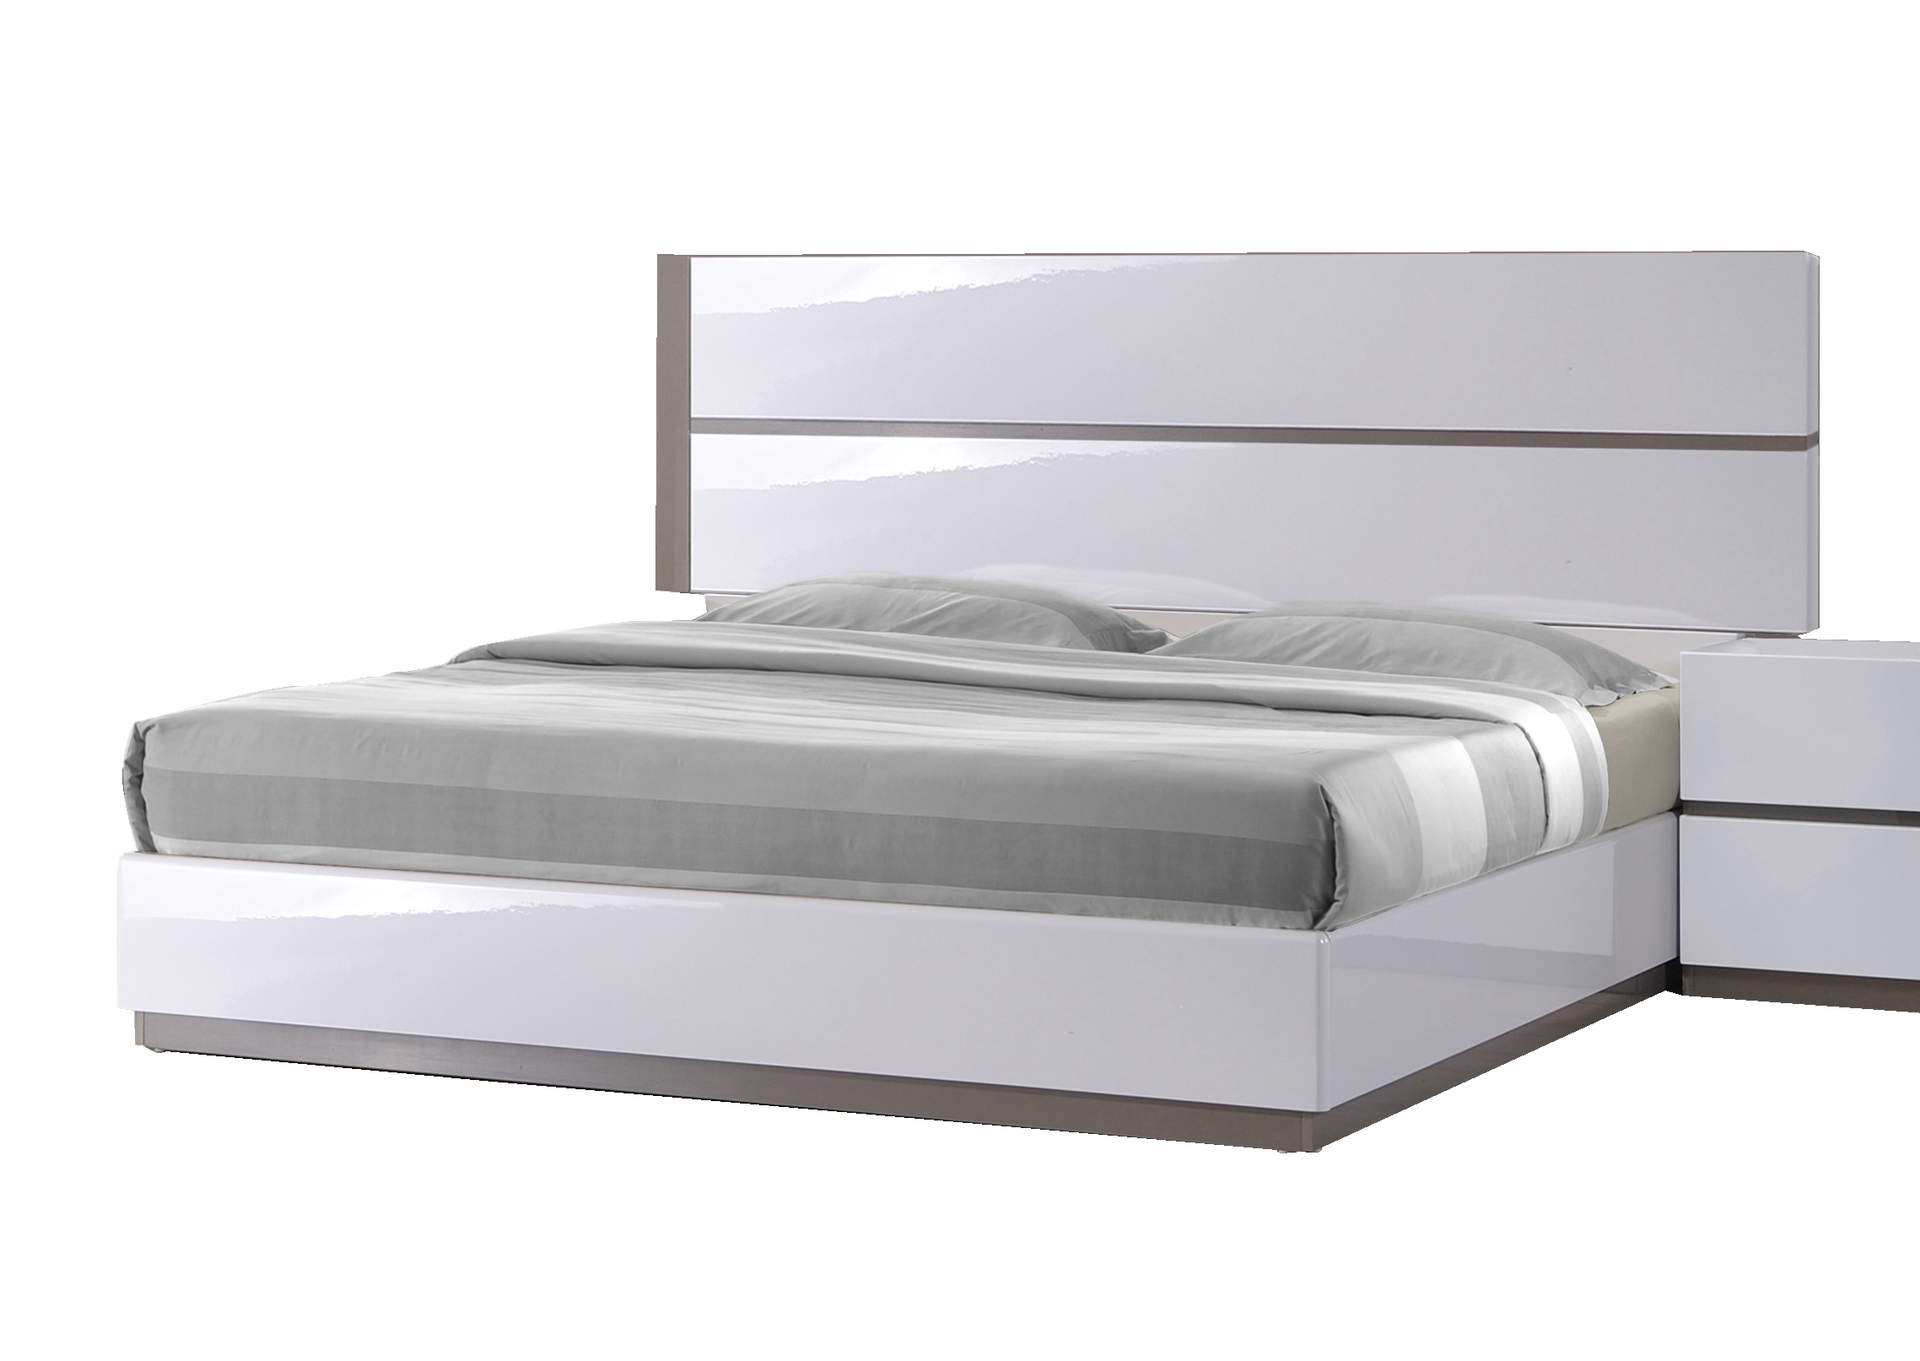 Modern 2-Tone Queen Size Bed,Chintaly Imports